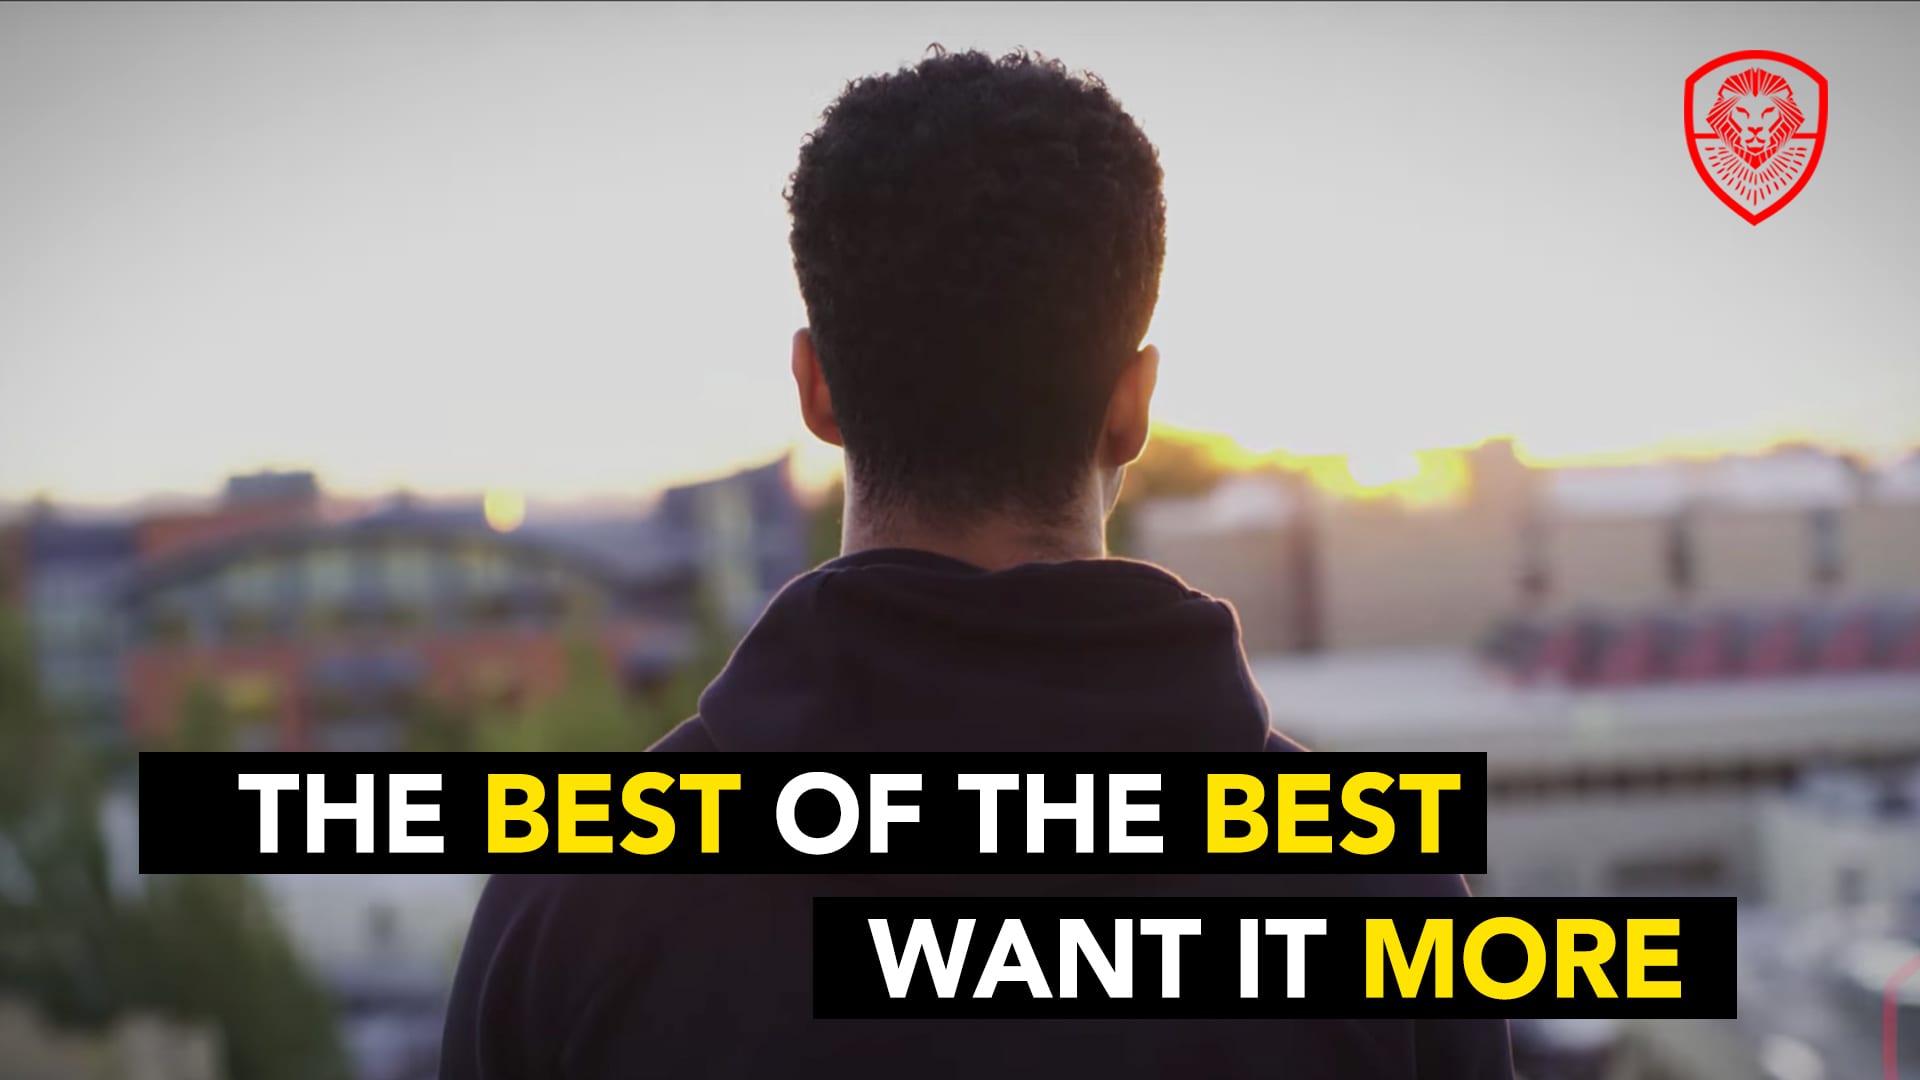 The Best of The Best Want it More - Tim Grover Motivation